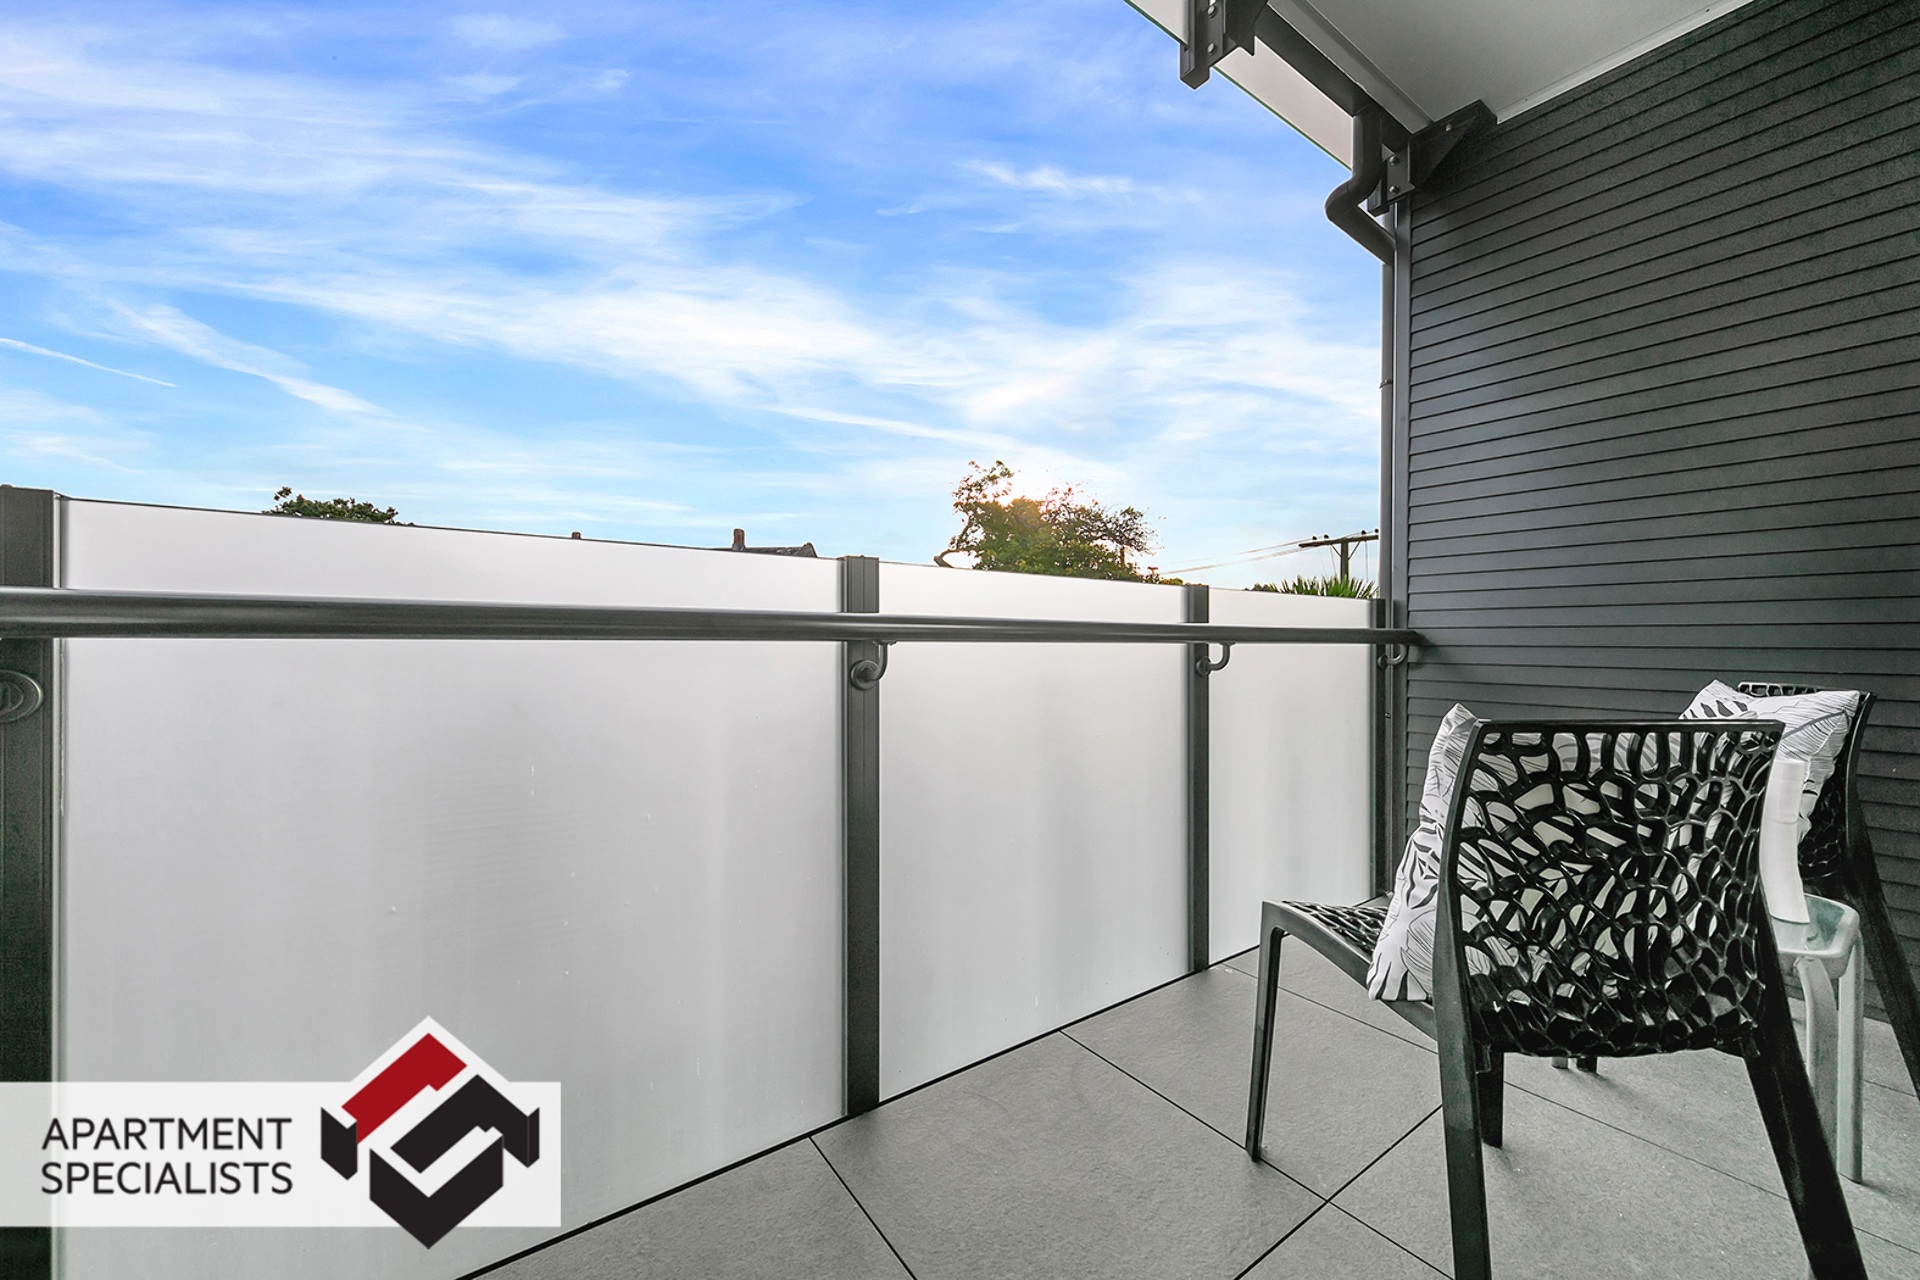 5 | 80 Richmond Road, Ponsonby | Apartment Specialists